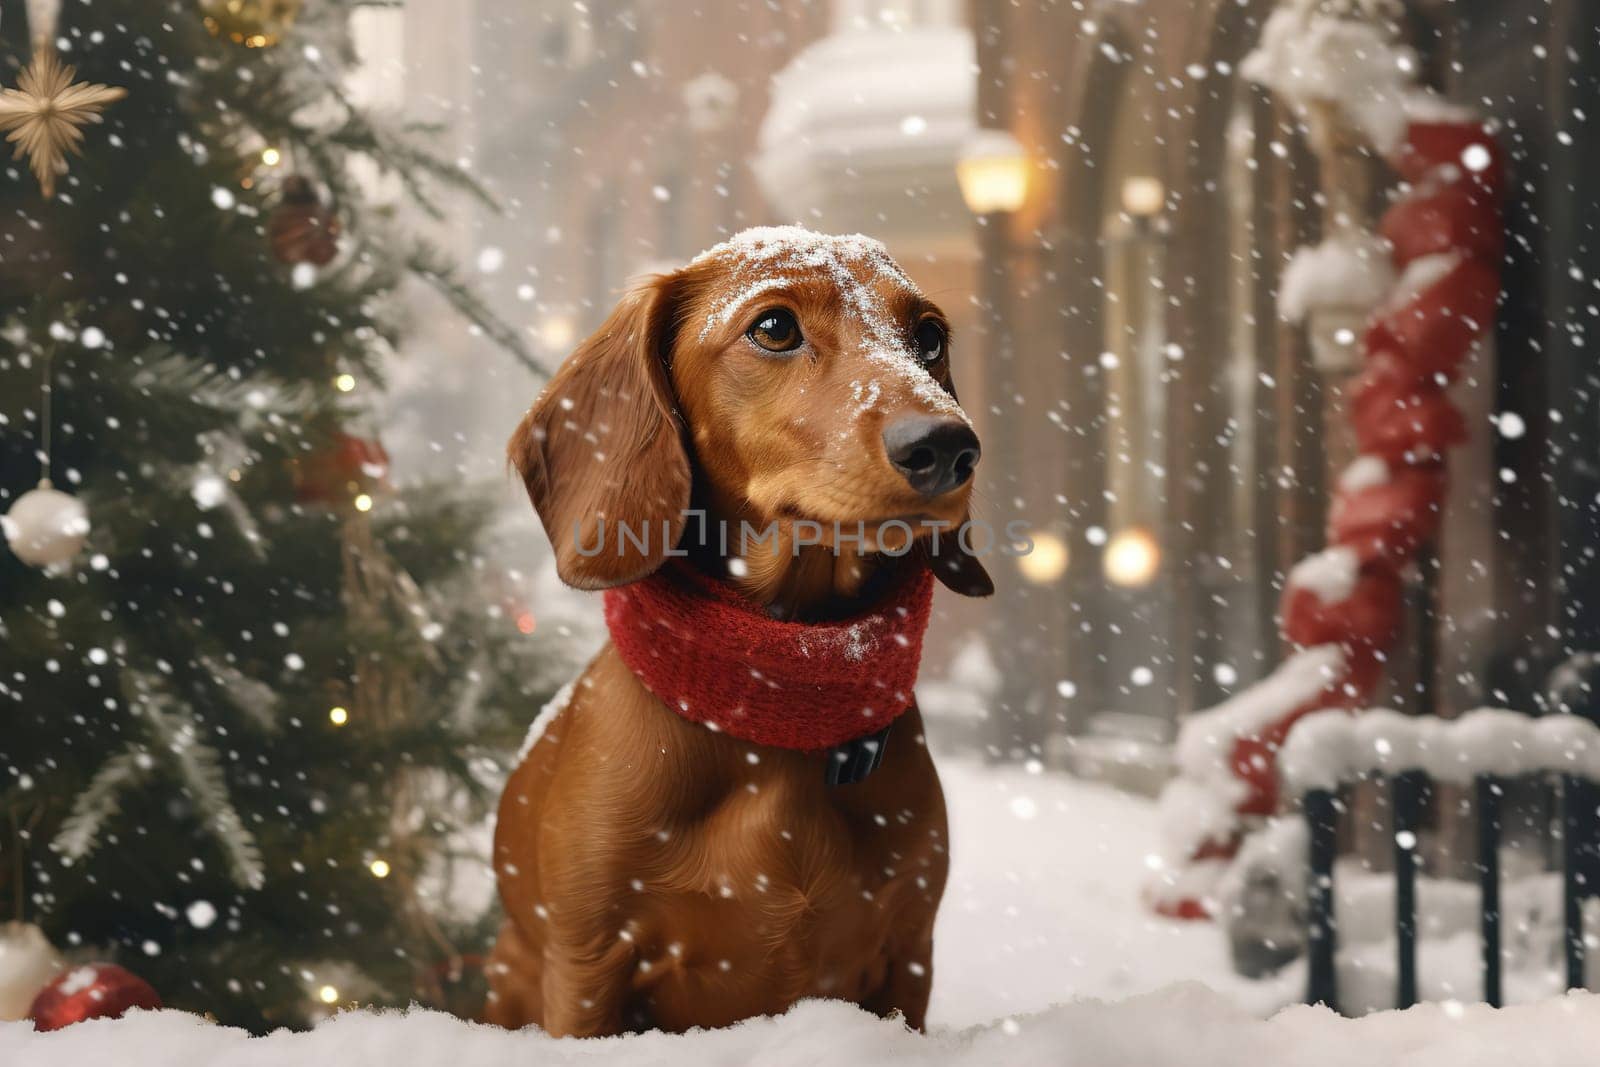 cute dachshund in a red scarf against the background of a decorated Christmas tree in the snow-covered yard of the house. by Proxima13